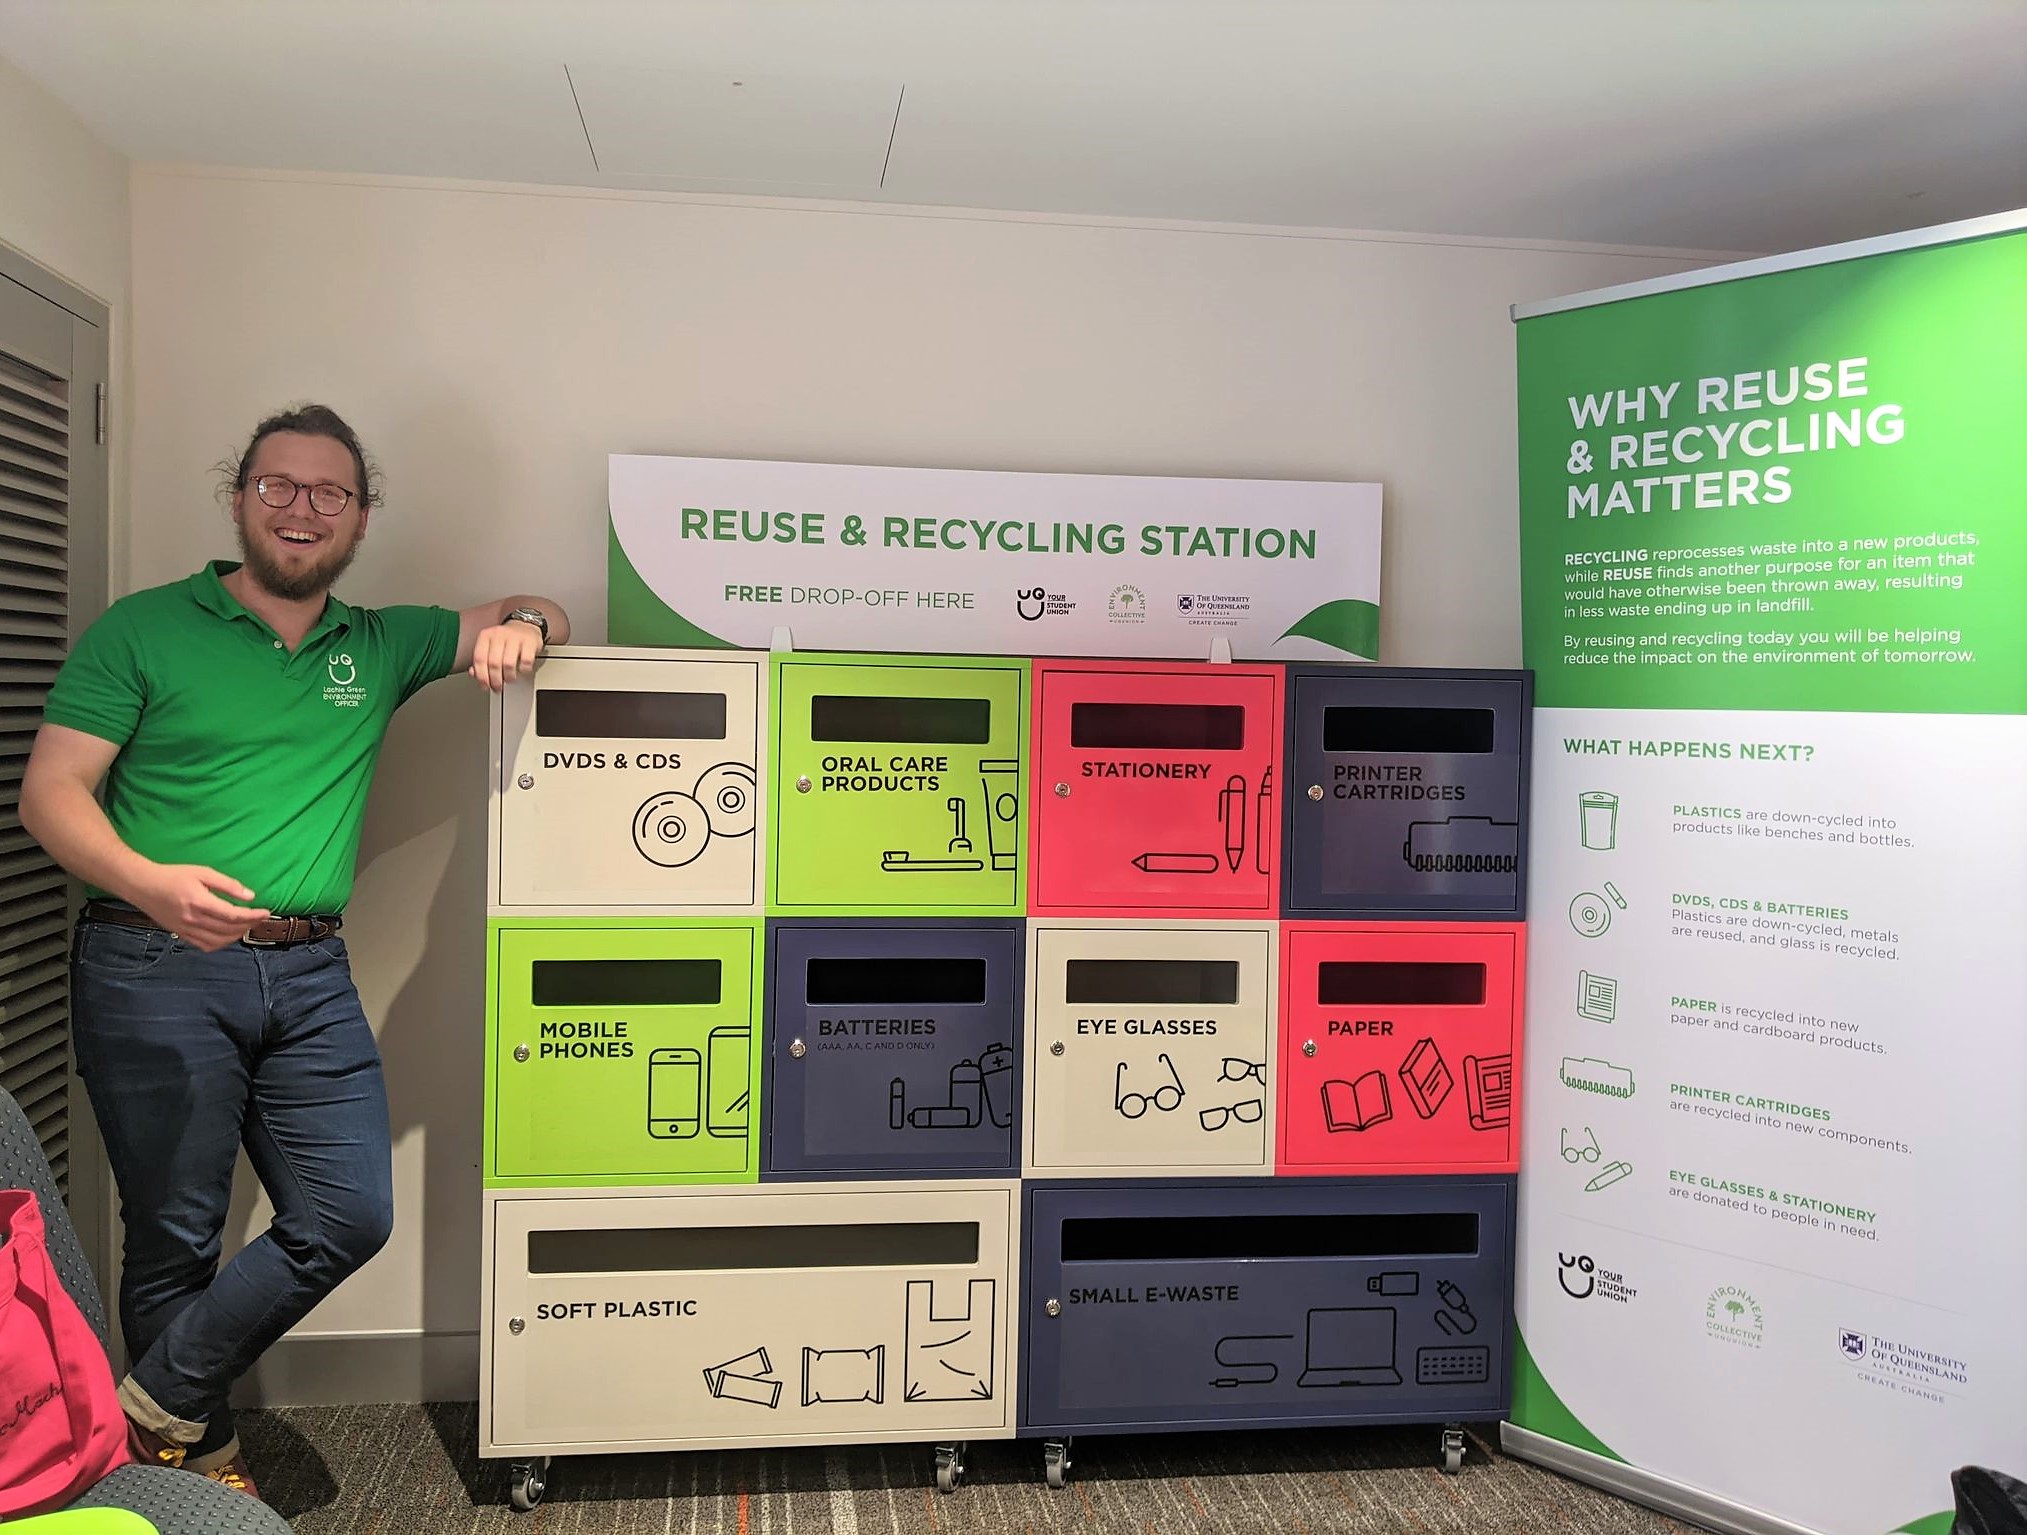 Reuse & Recycle at UQ